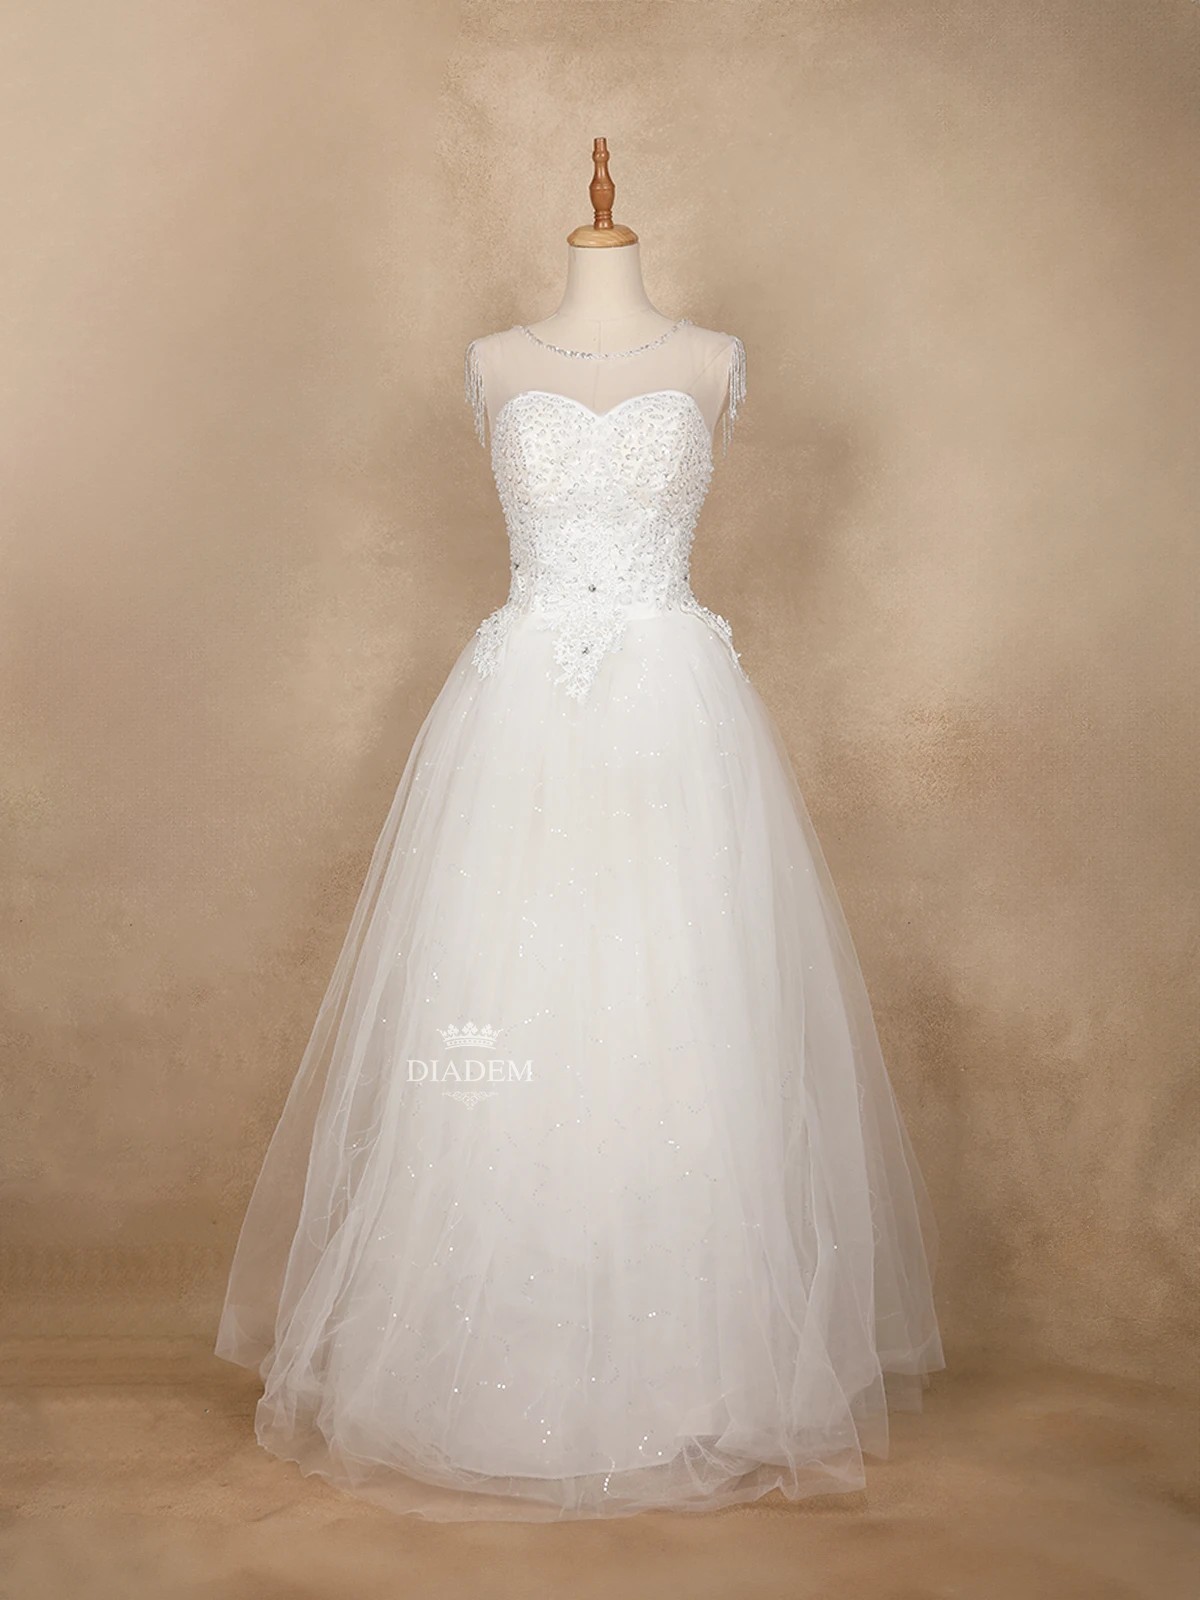 White Wedding Net Gown Adorned with Sequins and Bead Work With Beaded Tassels On Sleeve